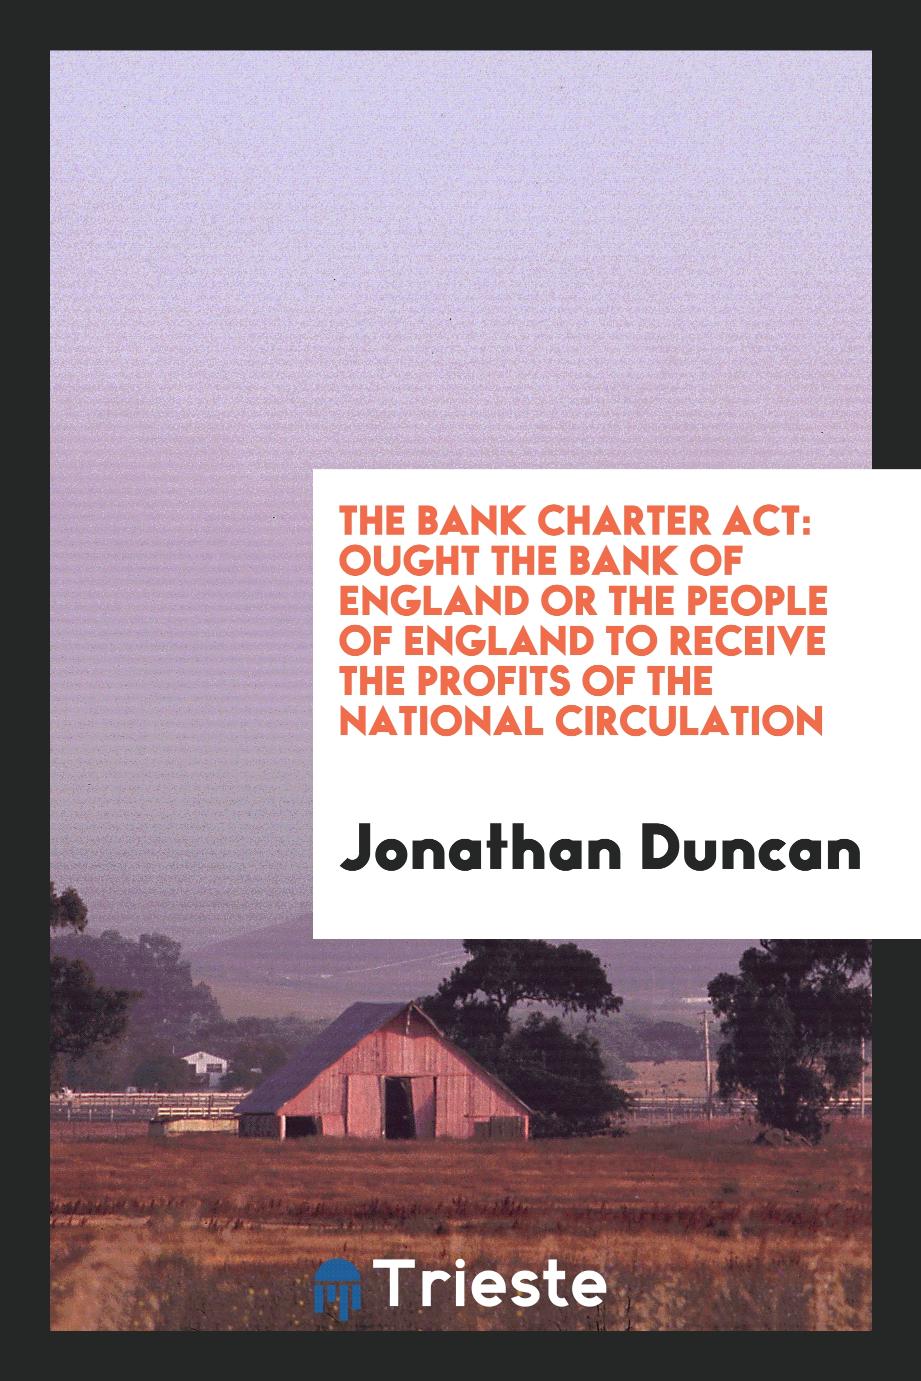 The Bank charter act: ought the Bank of England or the people of England to receive the profits of the national circulation